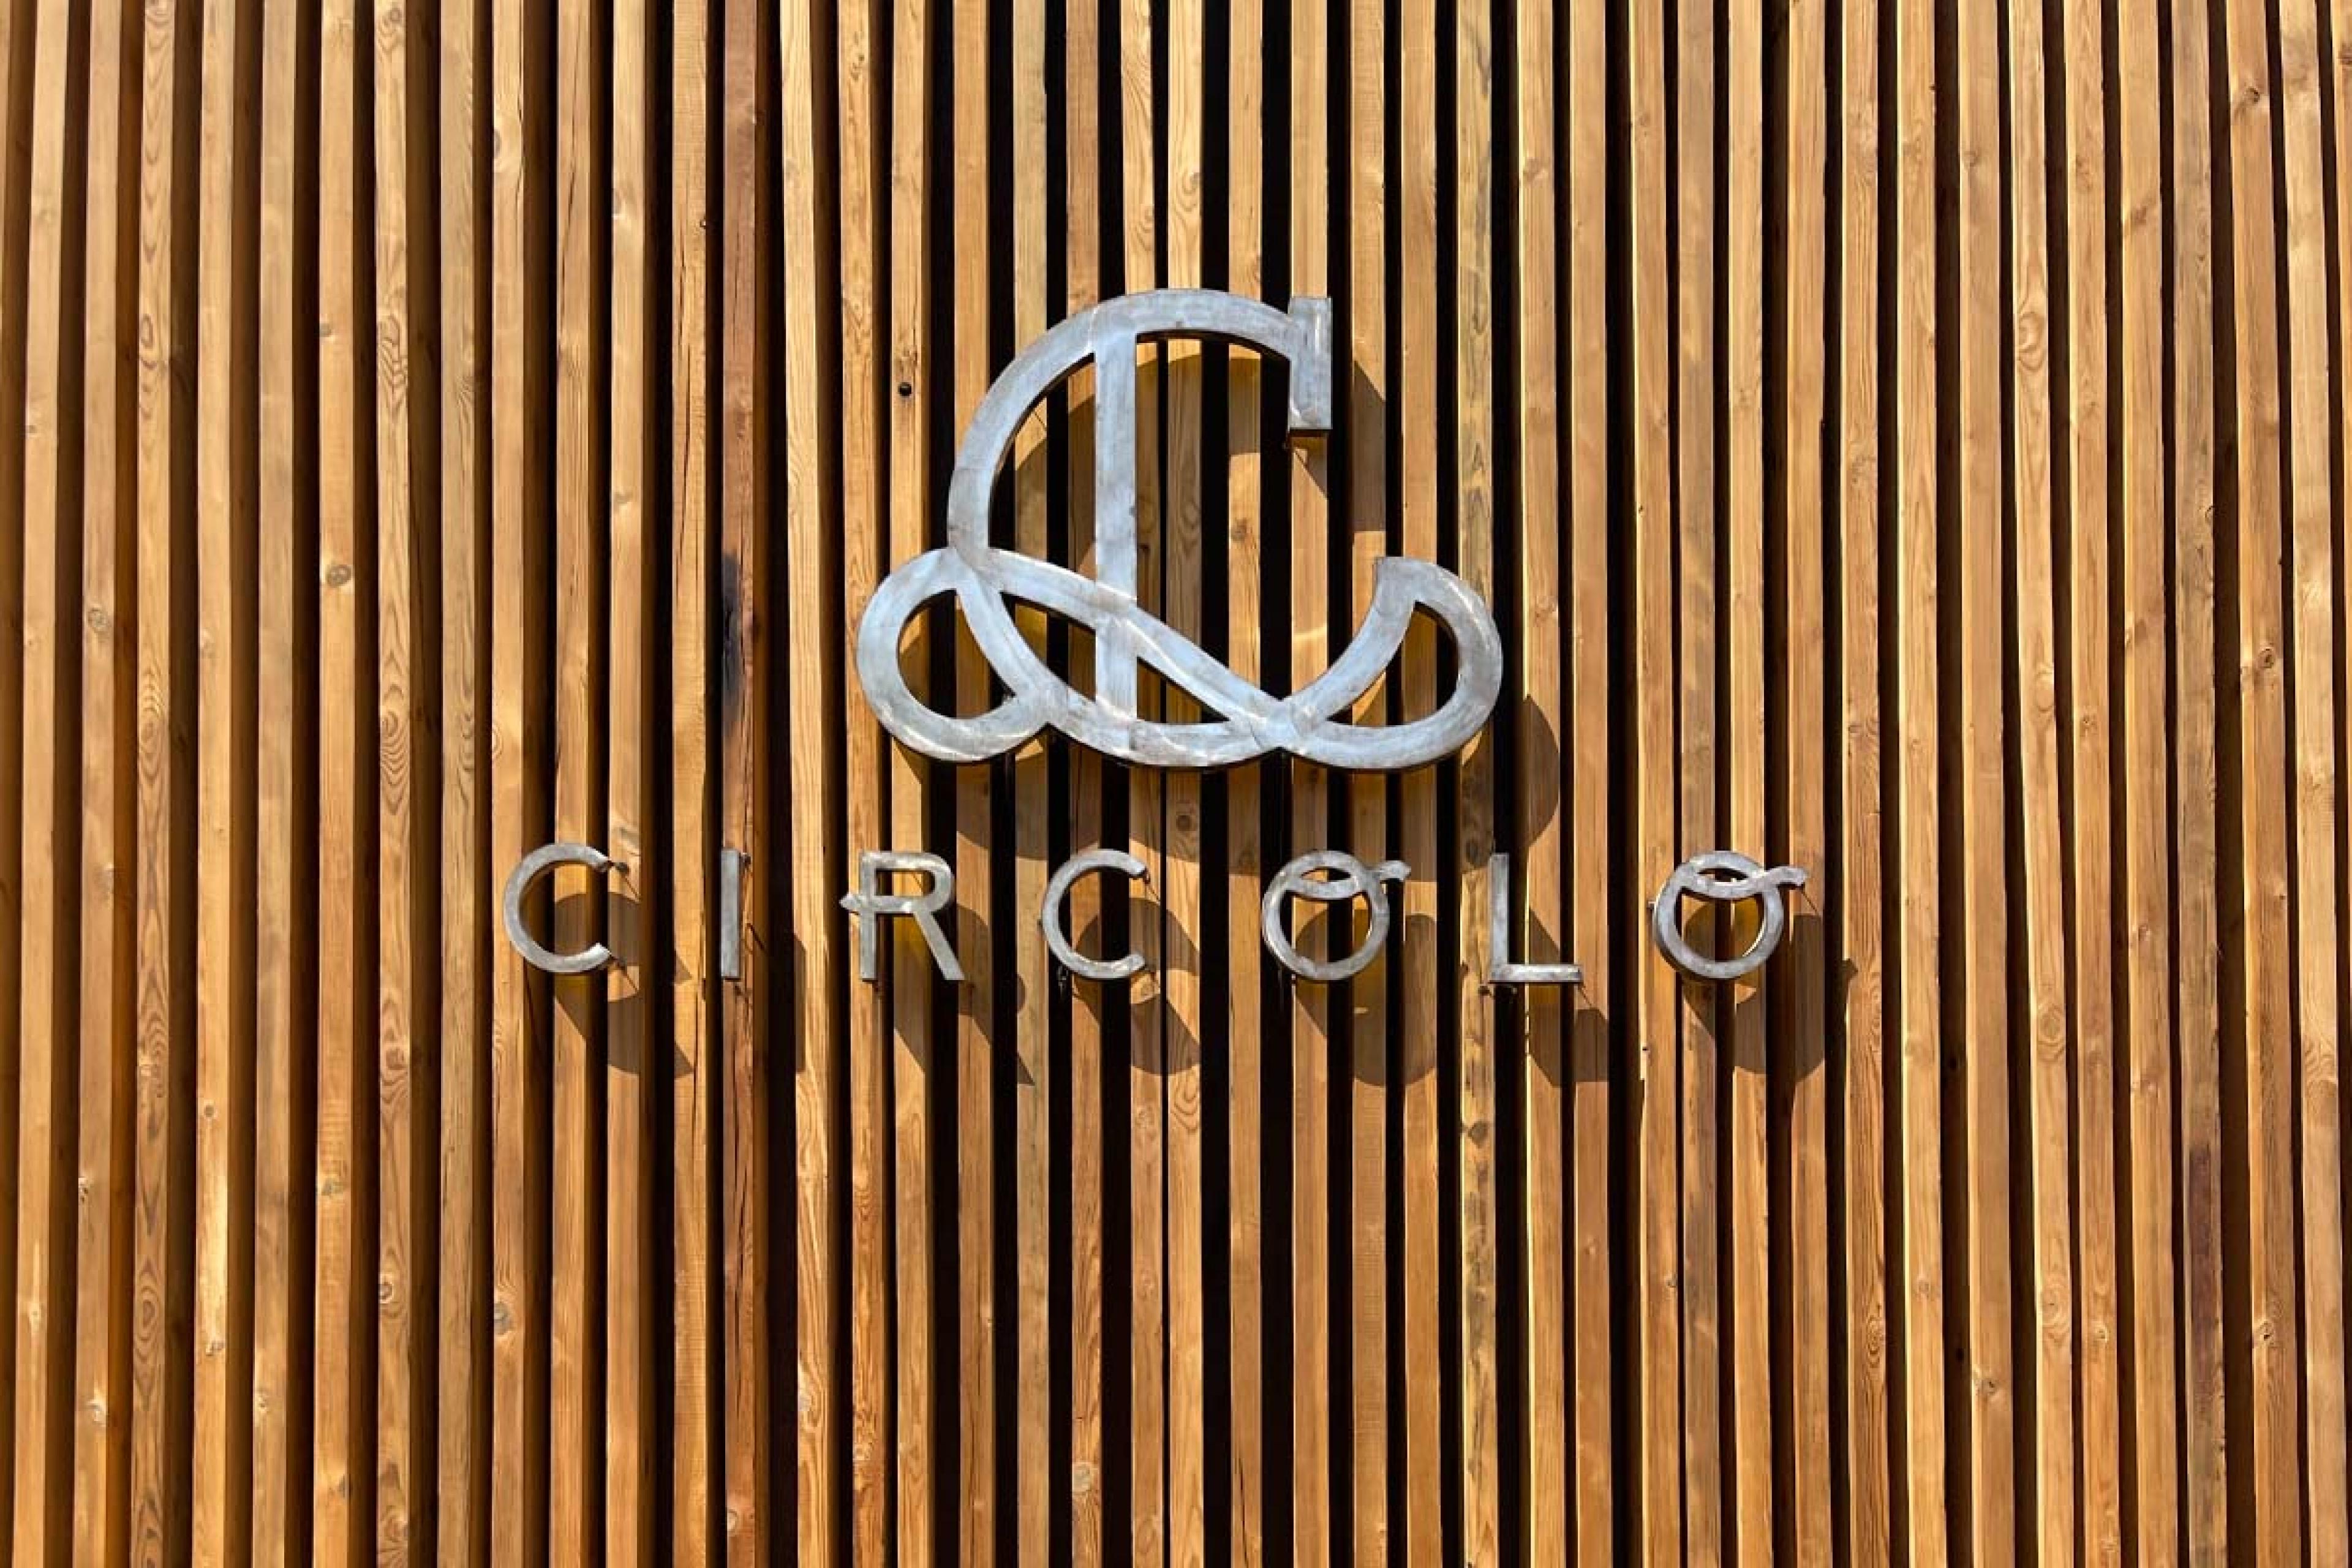 wooden plank sign with metal letters spelling "circolo"